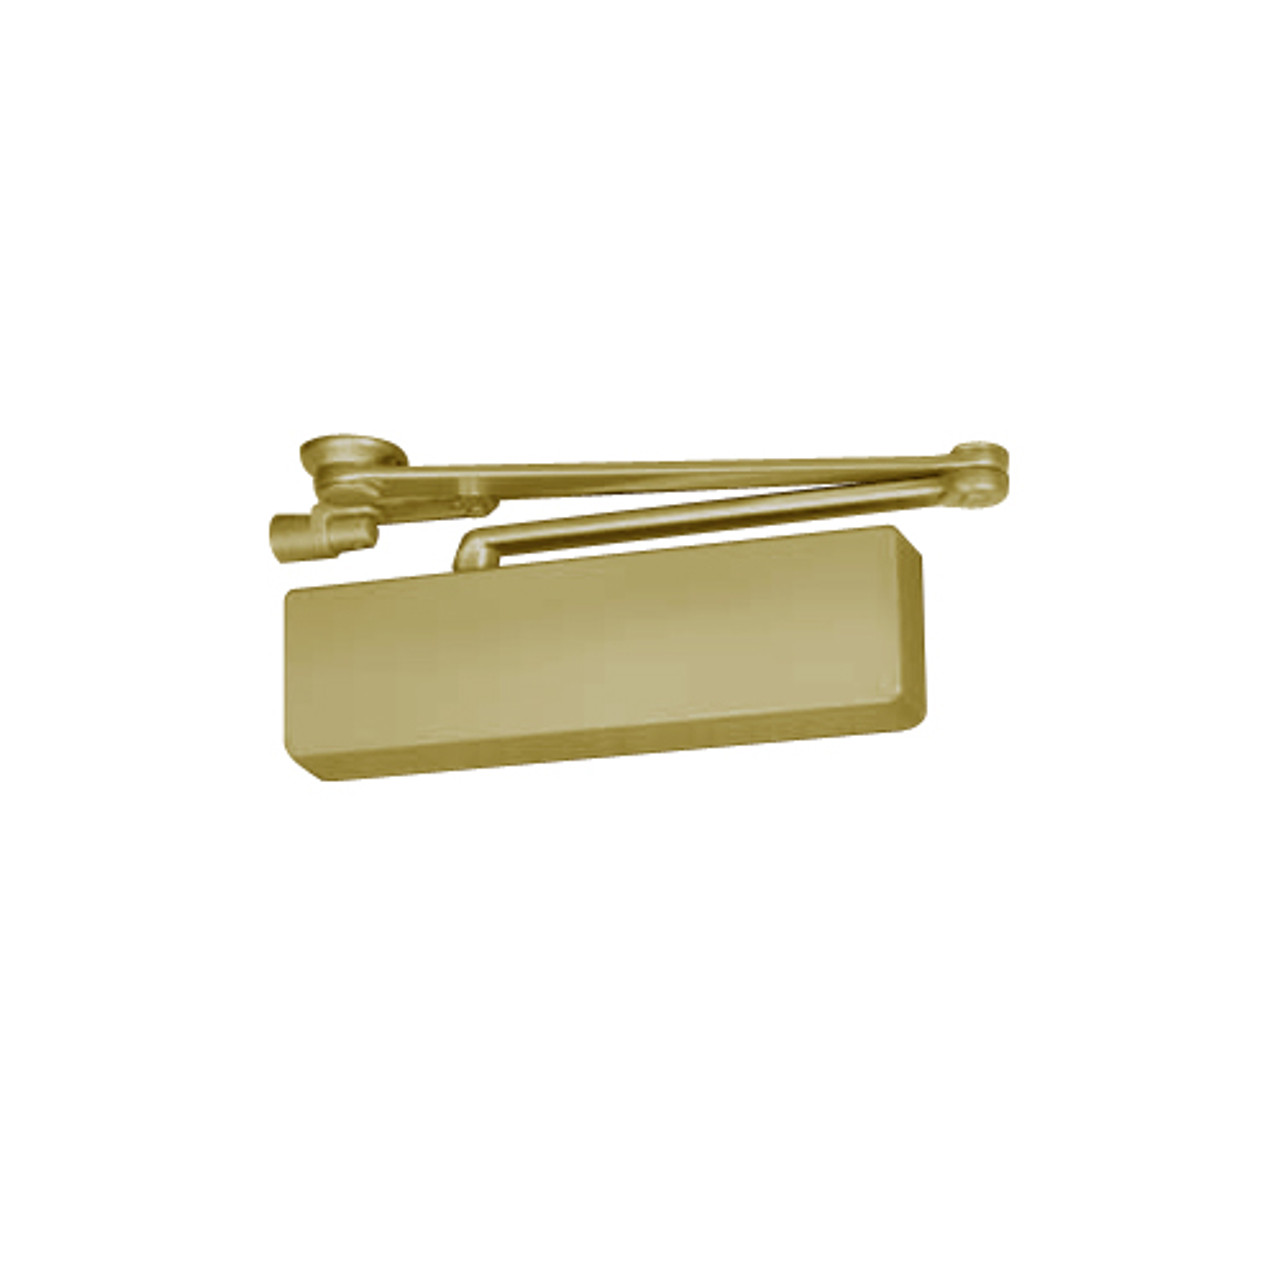 CPS7570TDA-696-RH Norton 7570 Series Security Door CloserPlus Spring Arm with Thumbturn Hold Open in Gold Finish